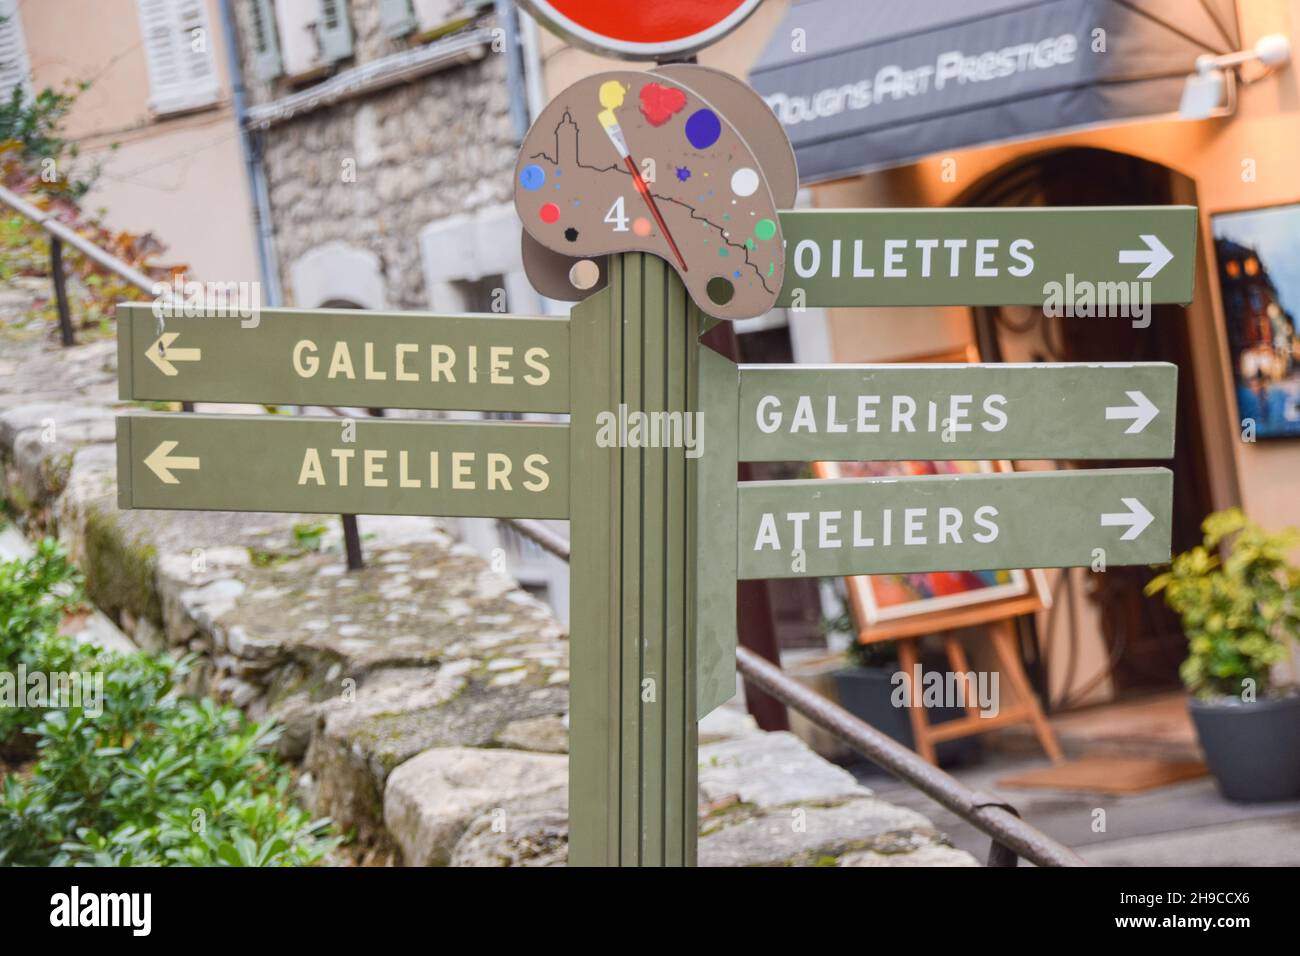 A sign showing ateliers and galleries in Mougins, South Of France. Stock Photo